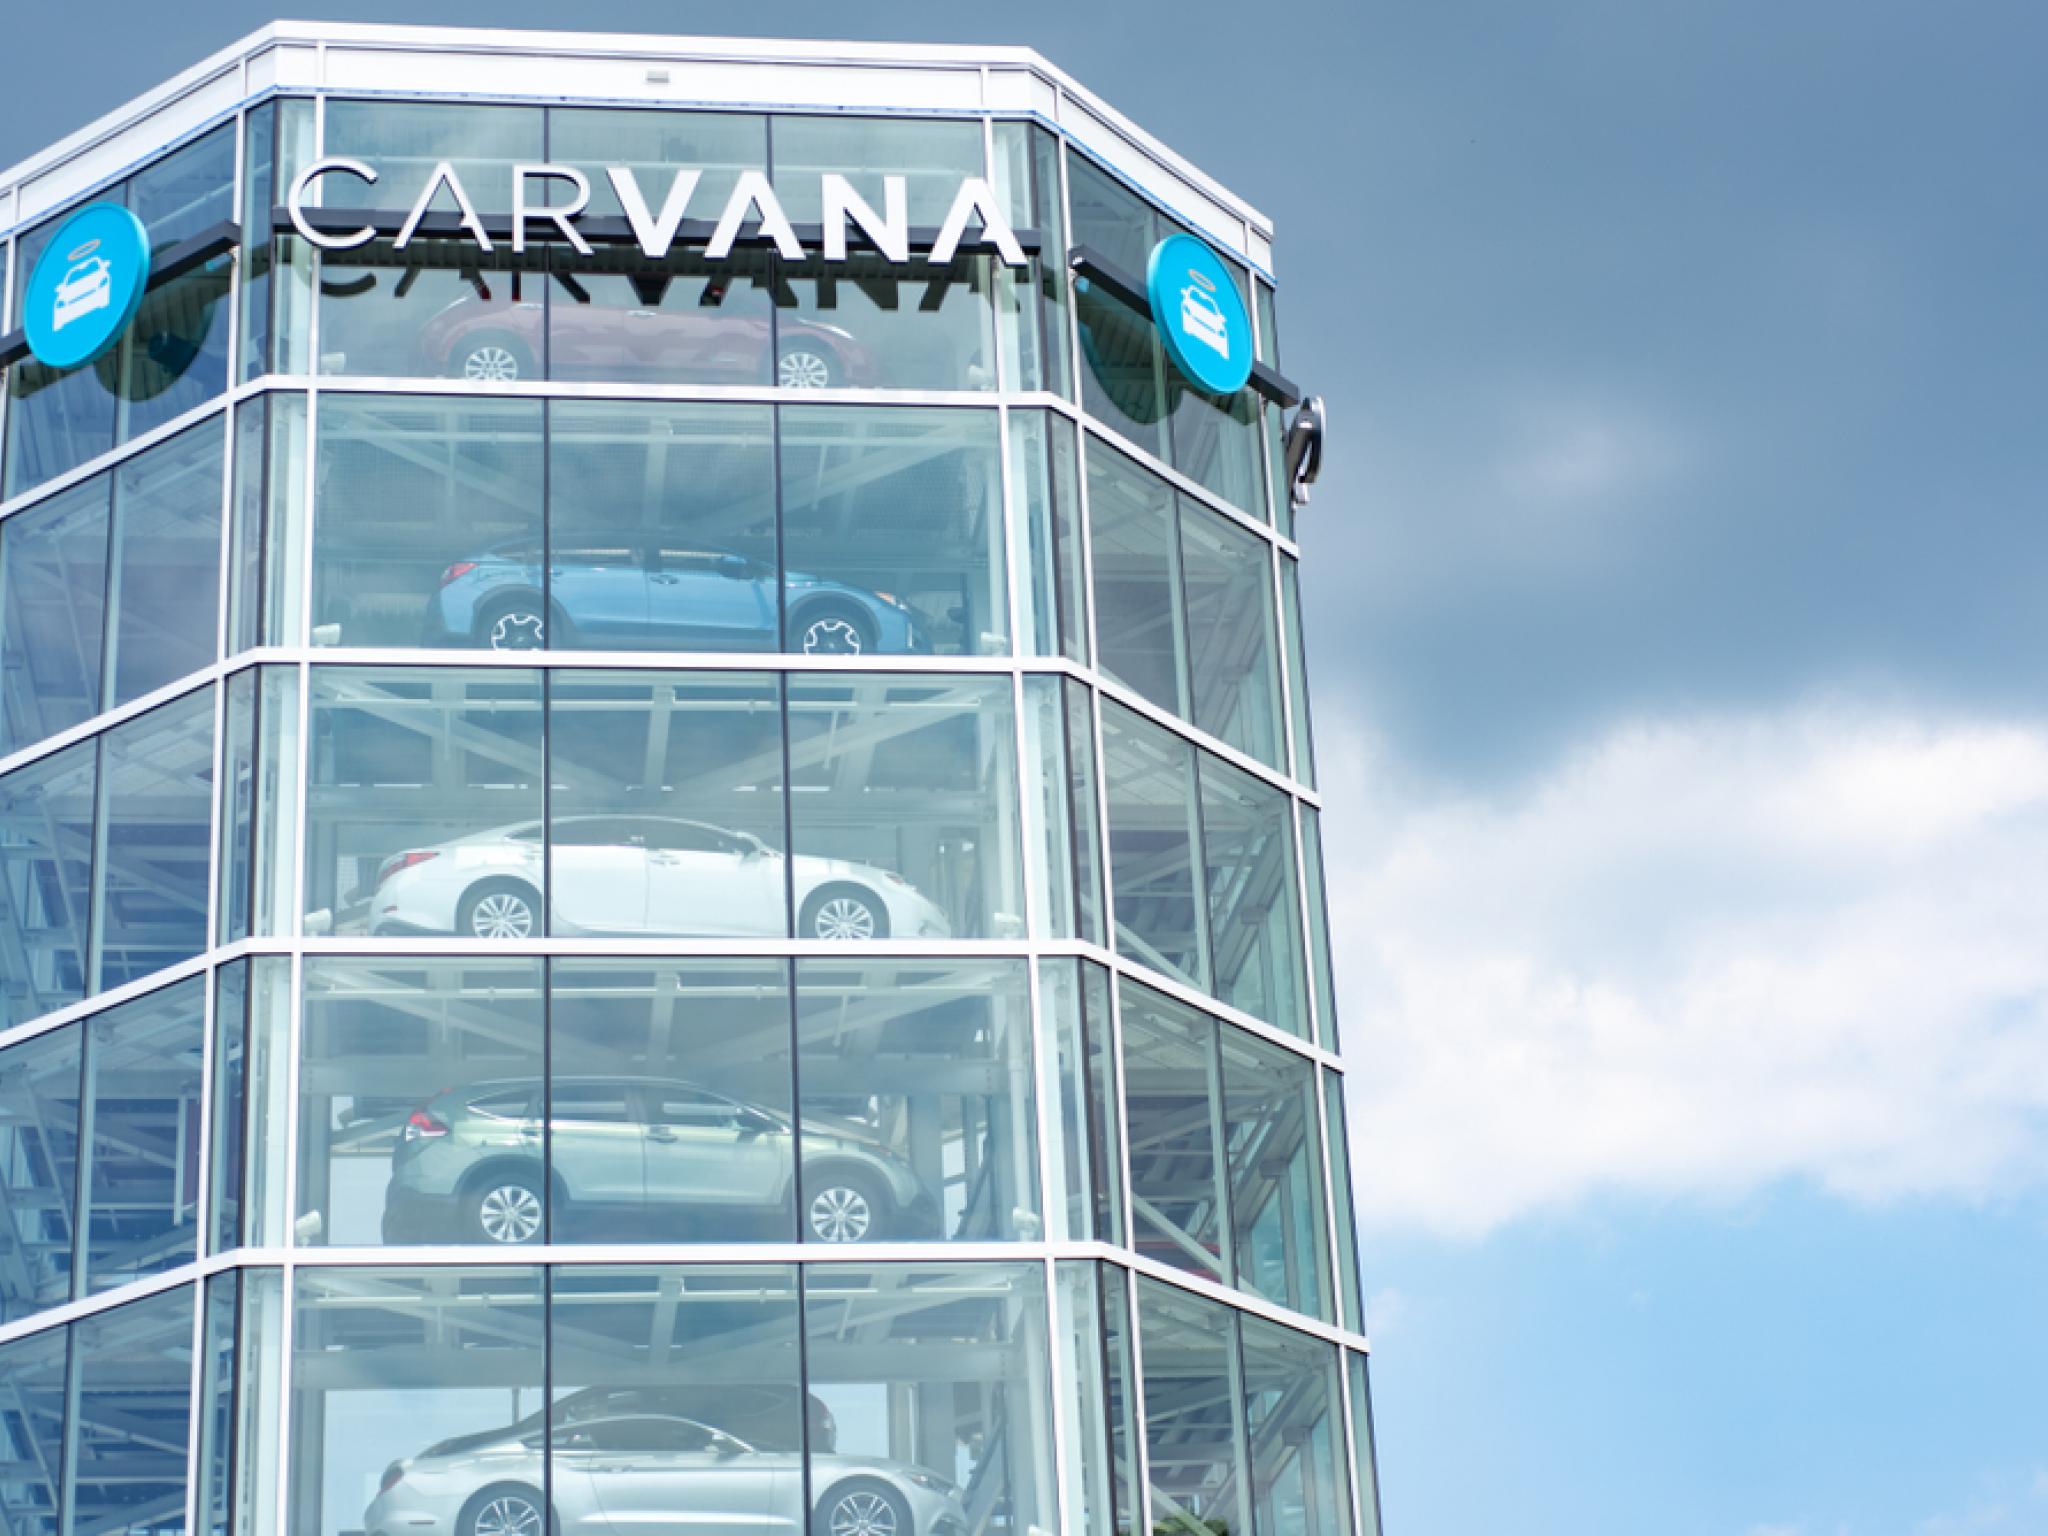  carvana-q2-earnings-revenue-beat-eps-beat-vehicle-sales-jump-33-upbeat-guidance-and-more 